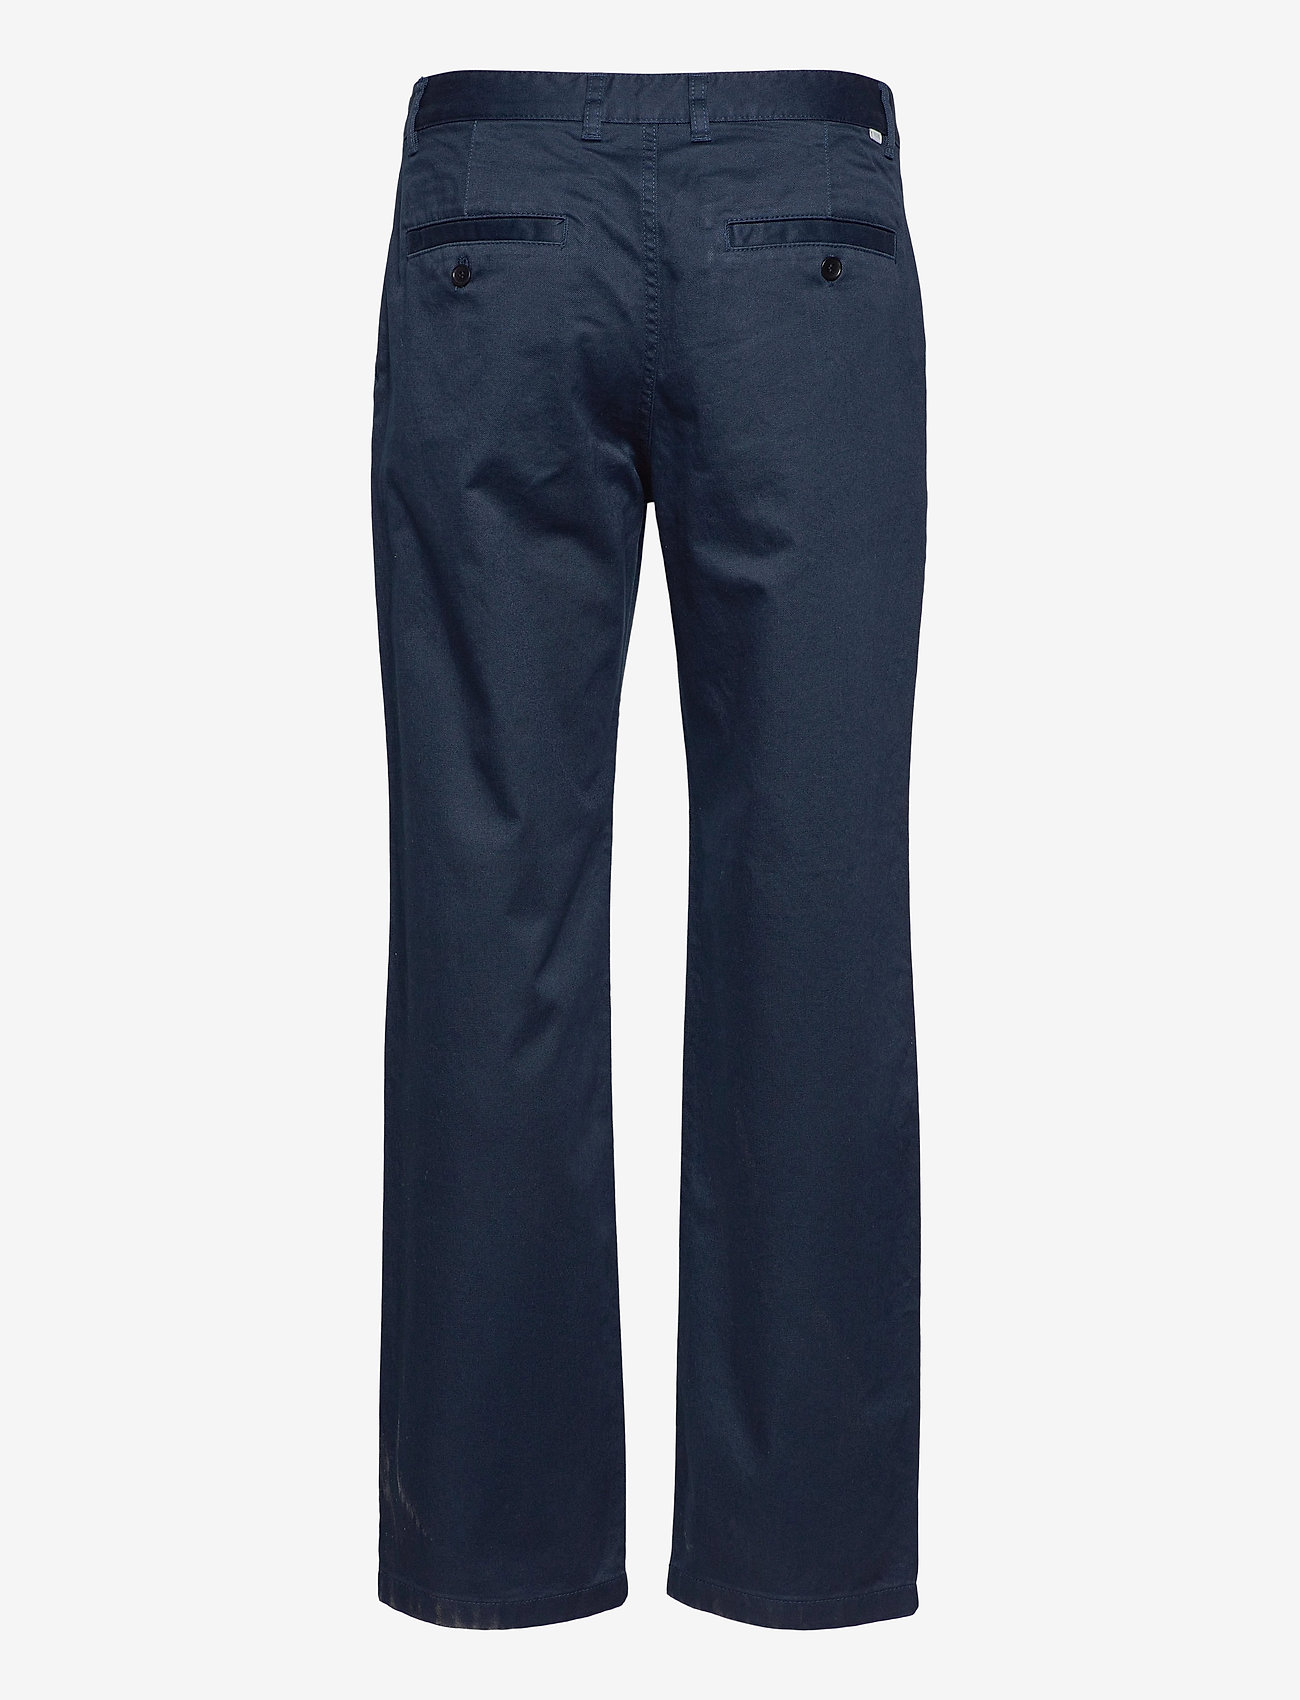 Wood Wood - Stefan classic trousers - chinosy - navy - 1